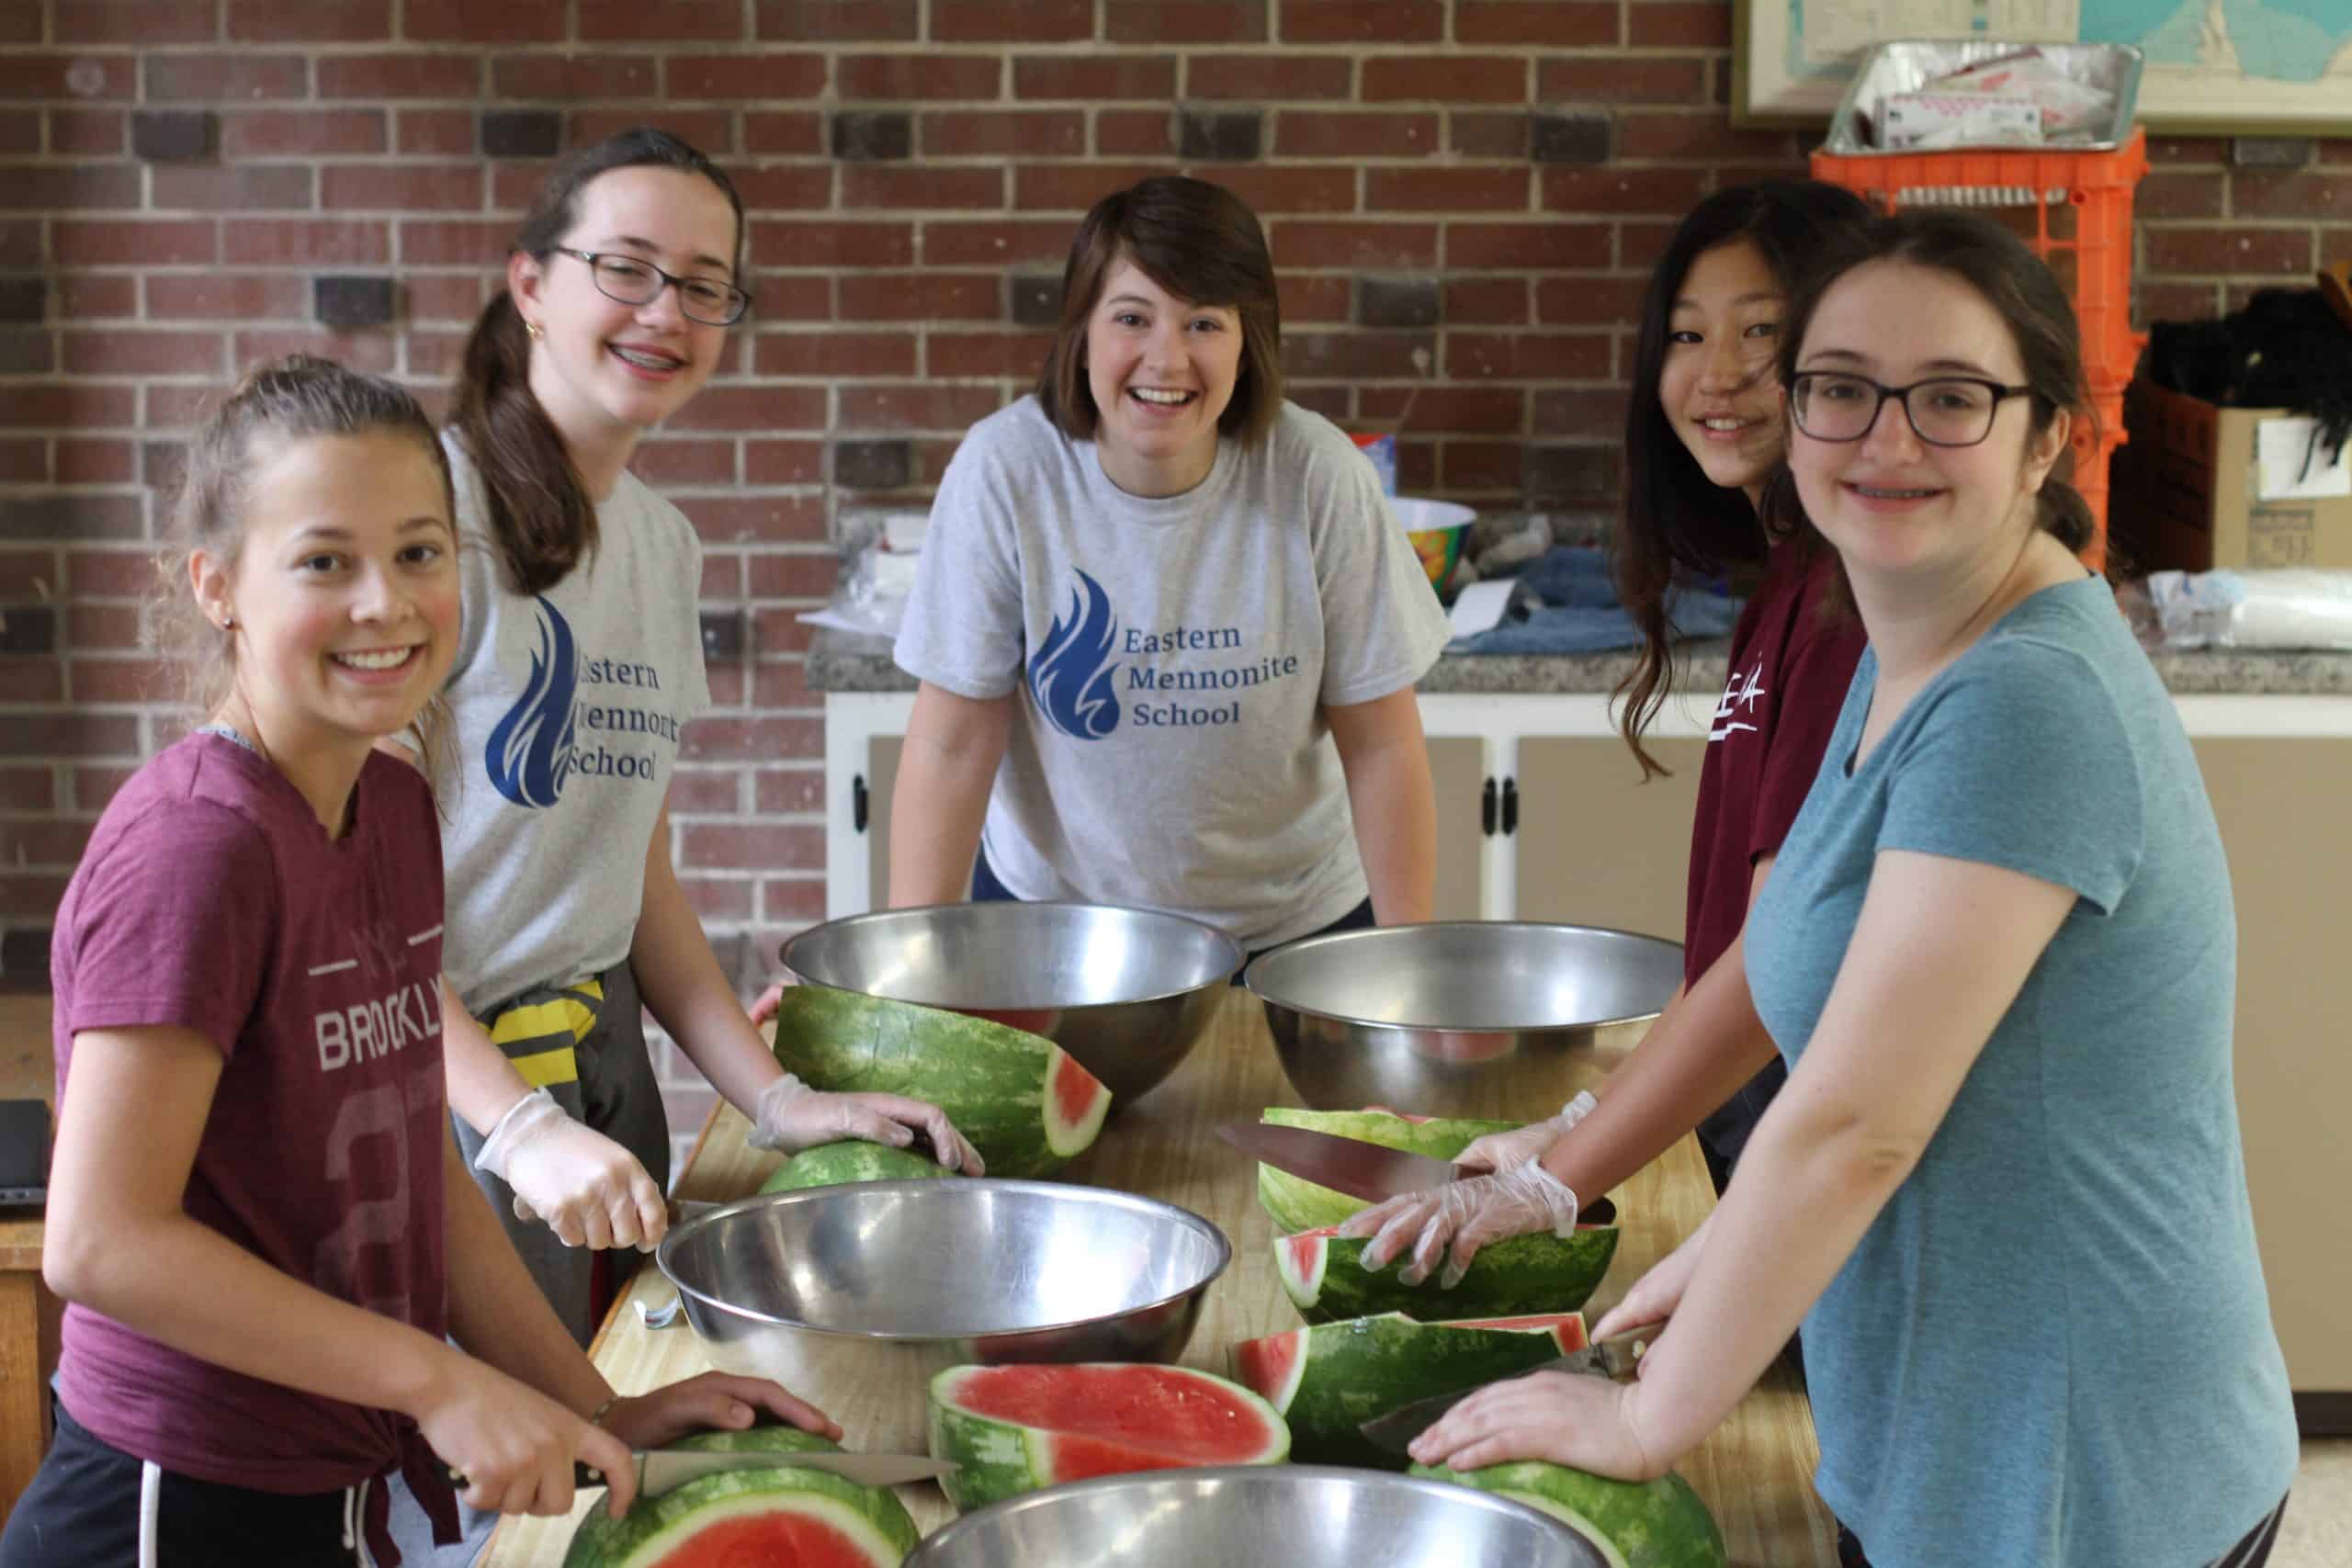 Anna Haarer and 8th grade students prepare snacks for elementary students as part of Community Service Day.